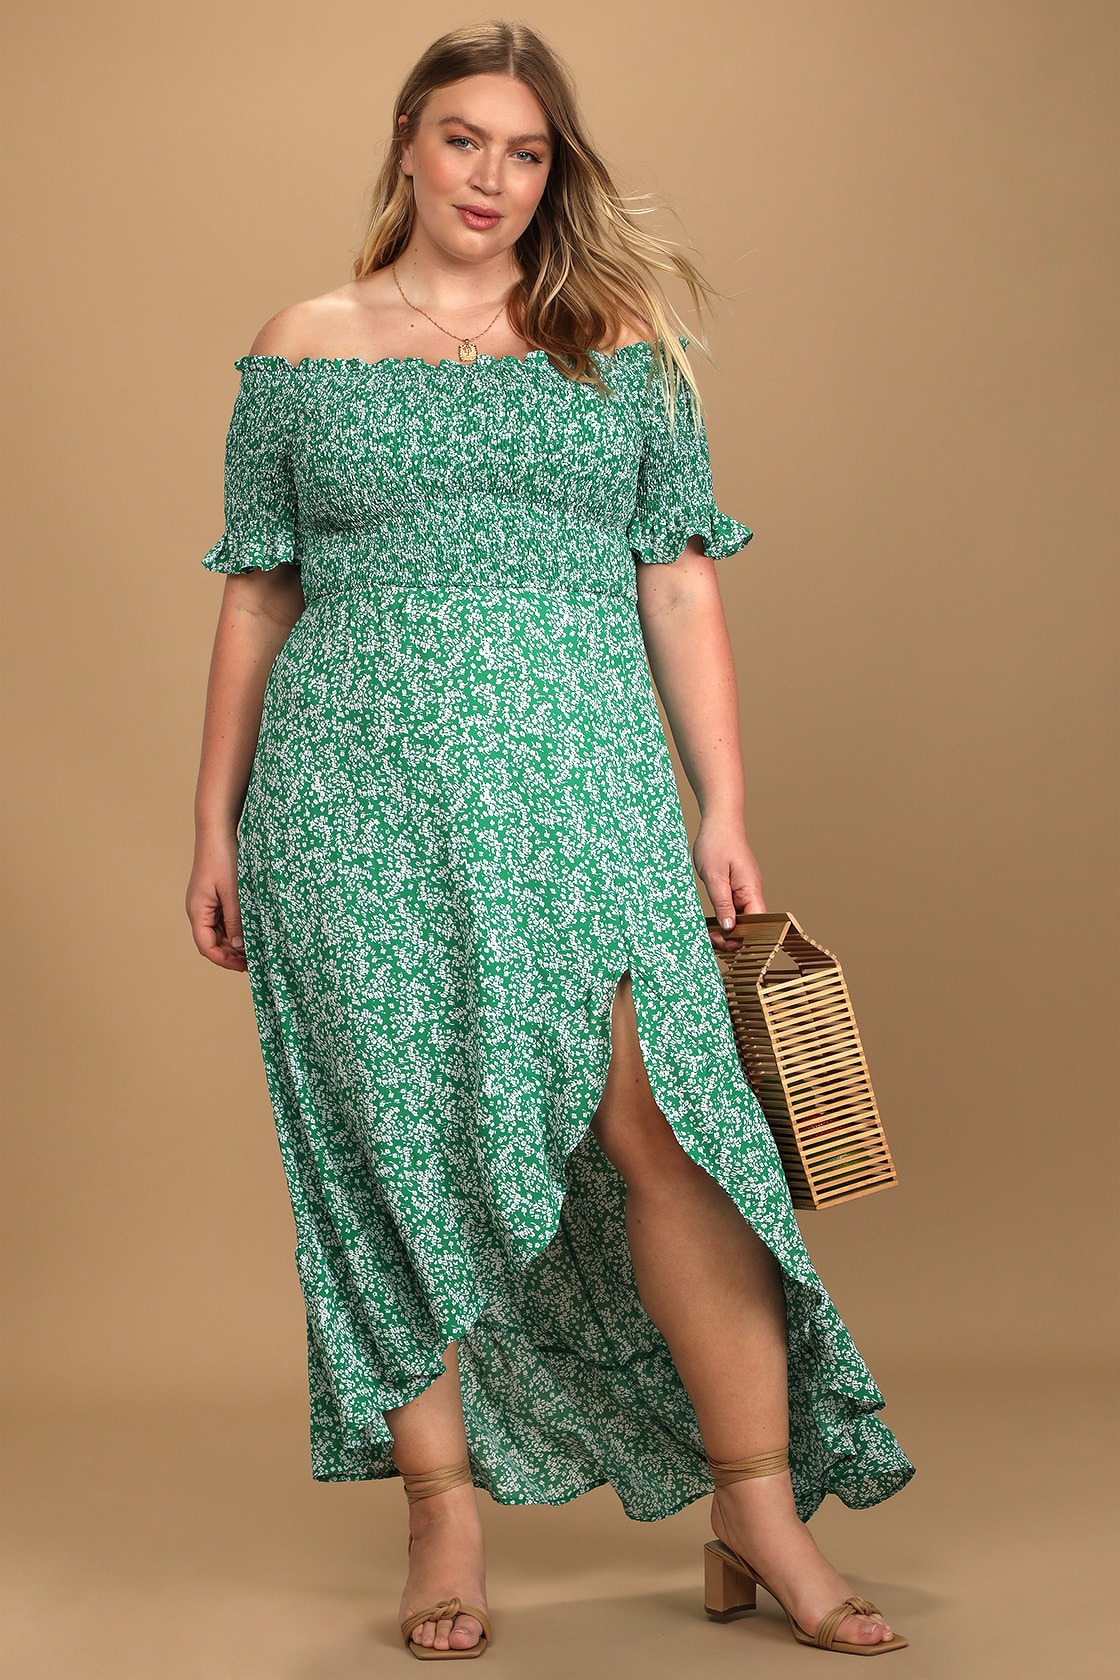 Plus Size Green Off Shoulder Floral Maxi Dress for Summer, Brunch, Lunch, and Bachelorette Party